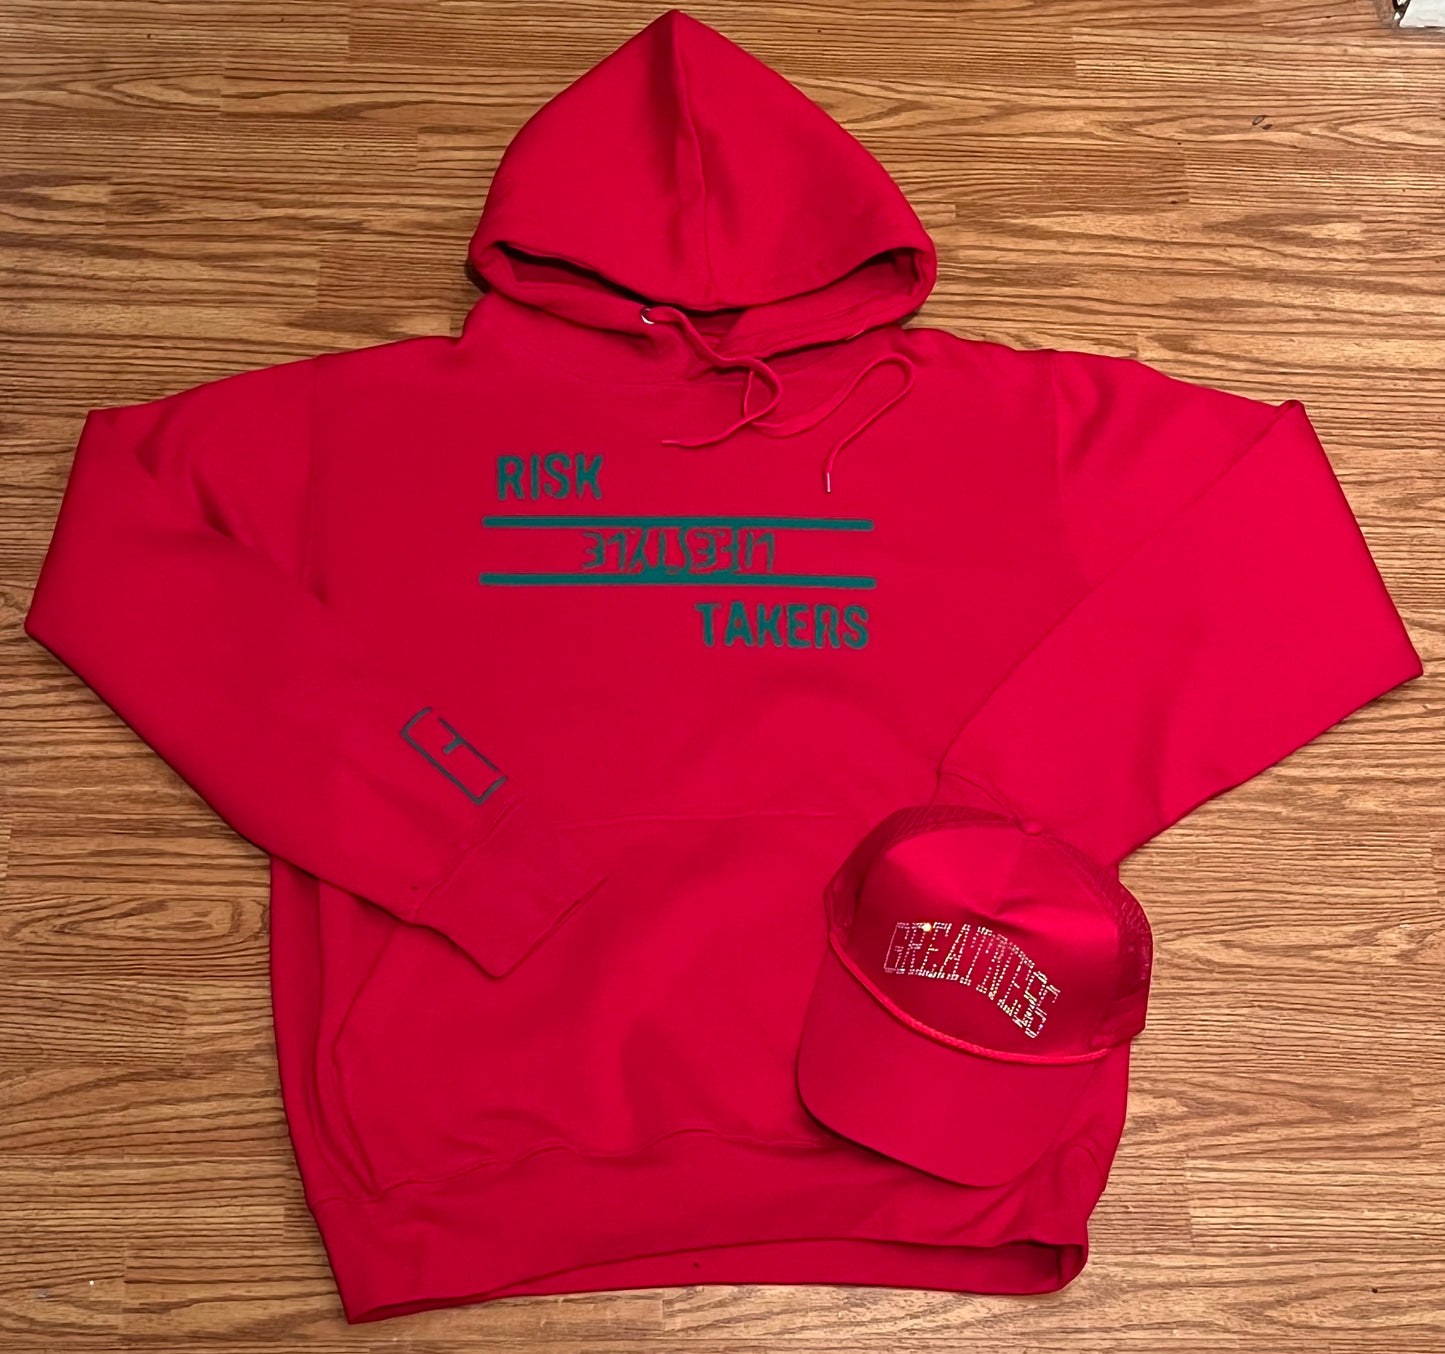 Risk Takers Lifestyle Hoodies